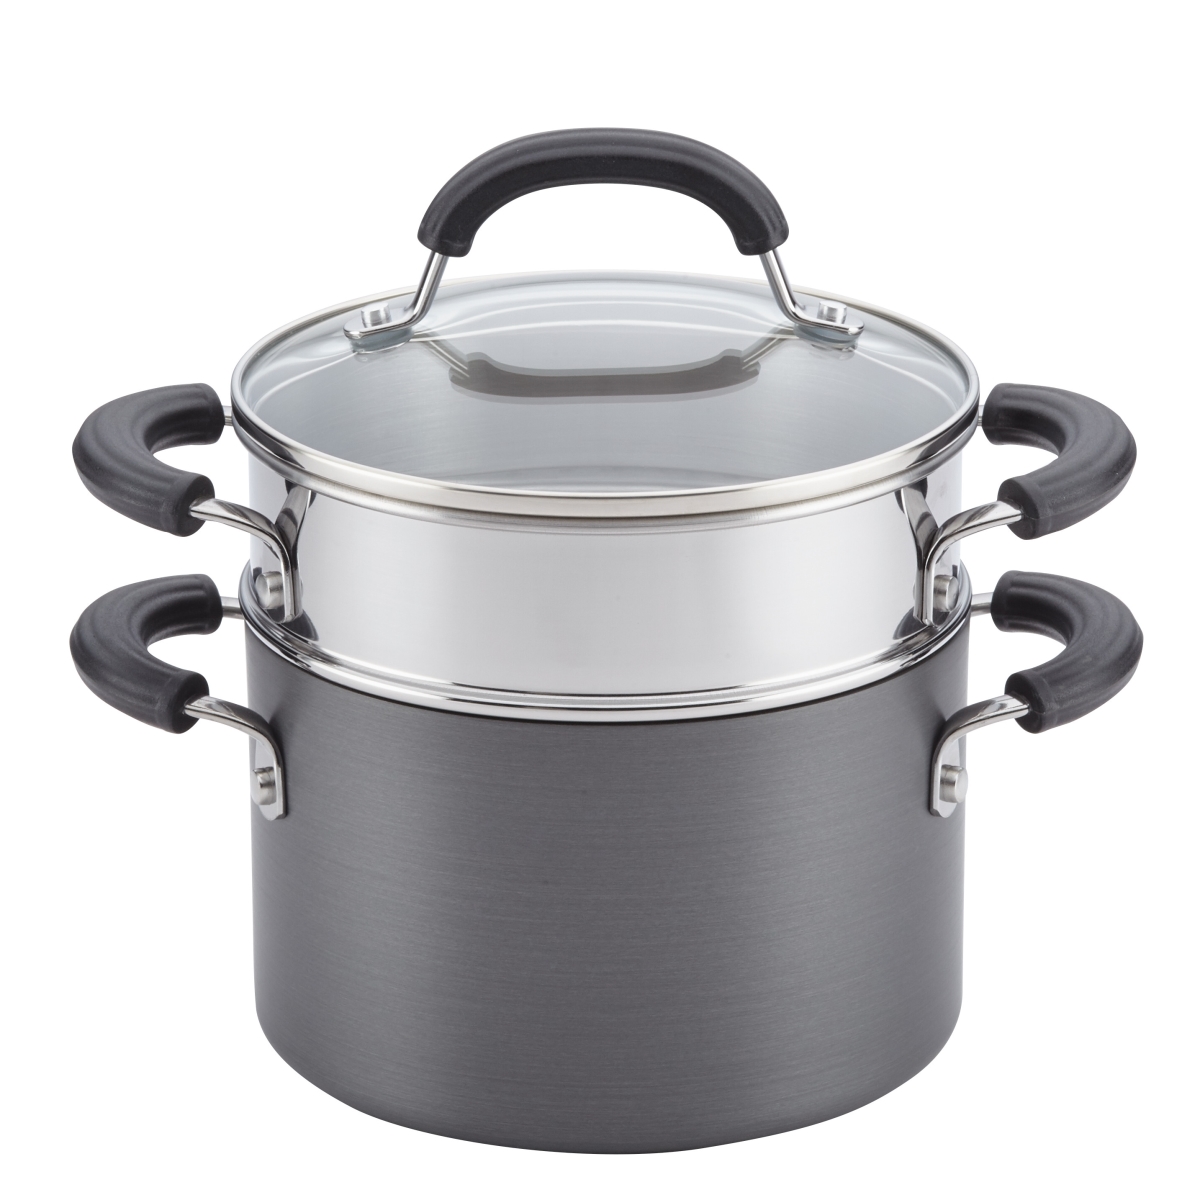 84207 Hard-anodized Nonstick 3 Qt. Covered Saucepot With Steamer Insert